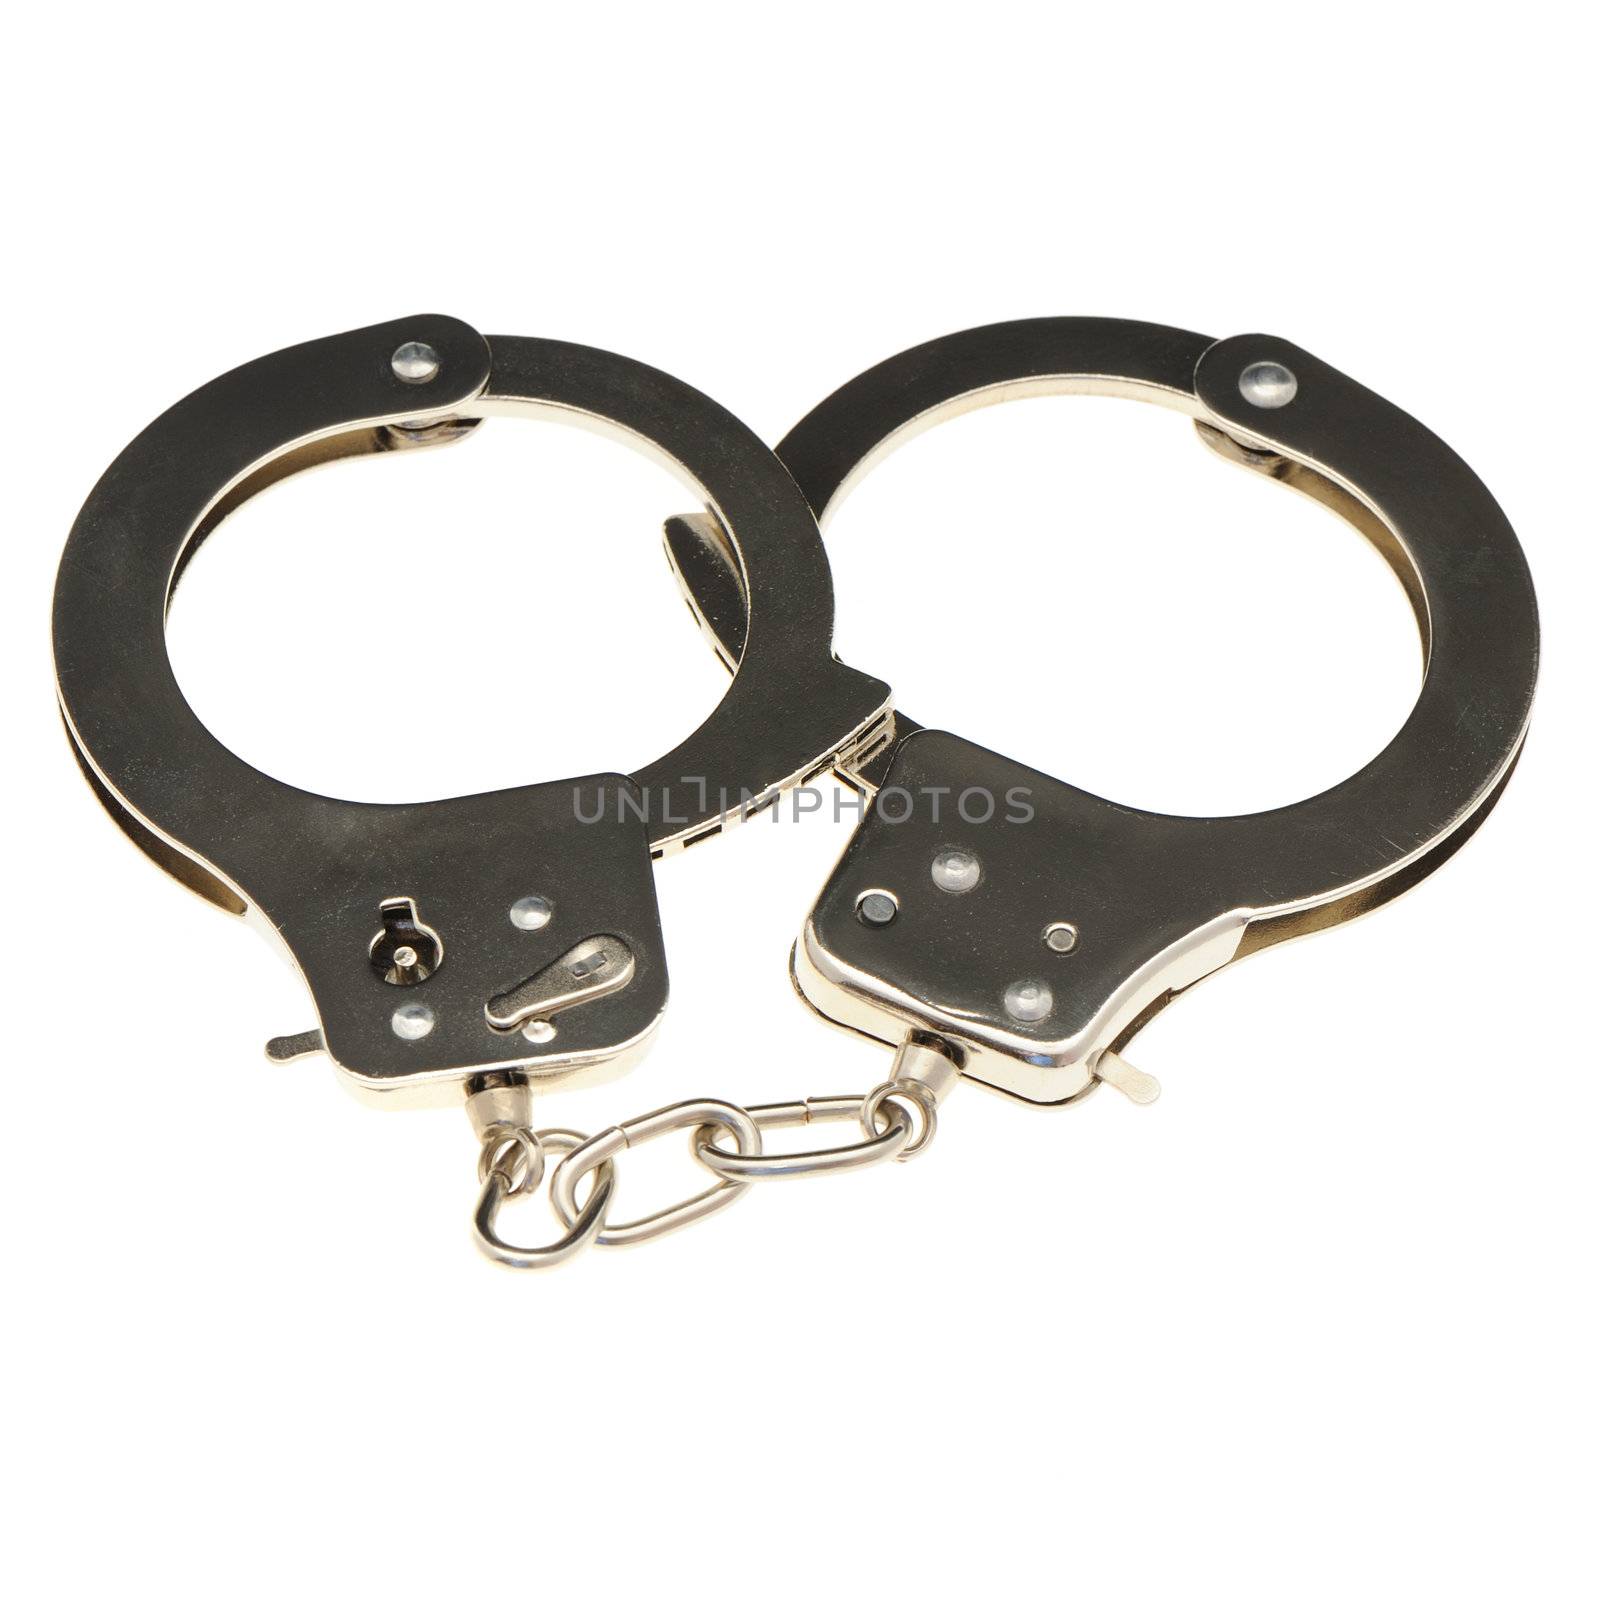 Handcuffs. Iron handcuffs isolated on a white background